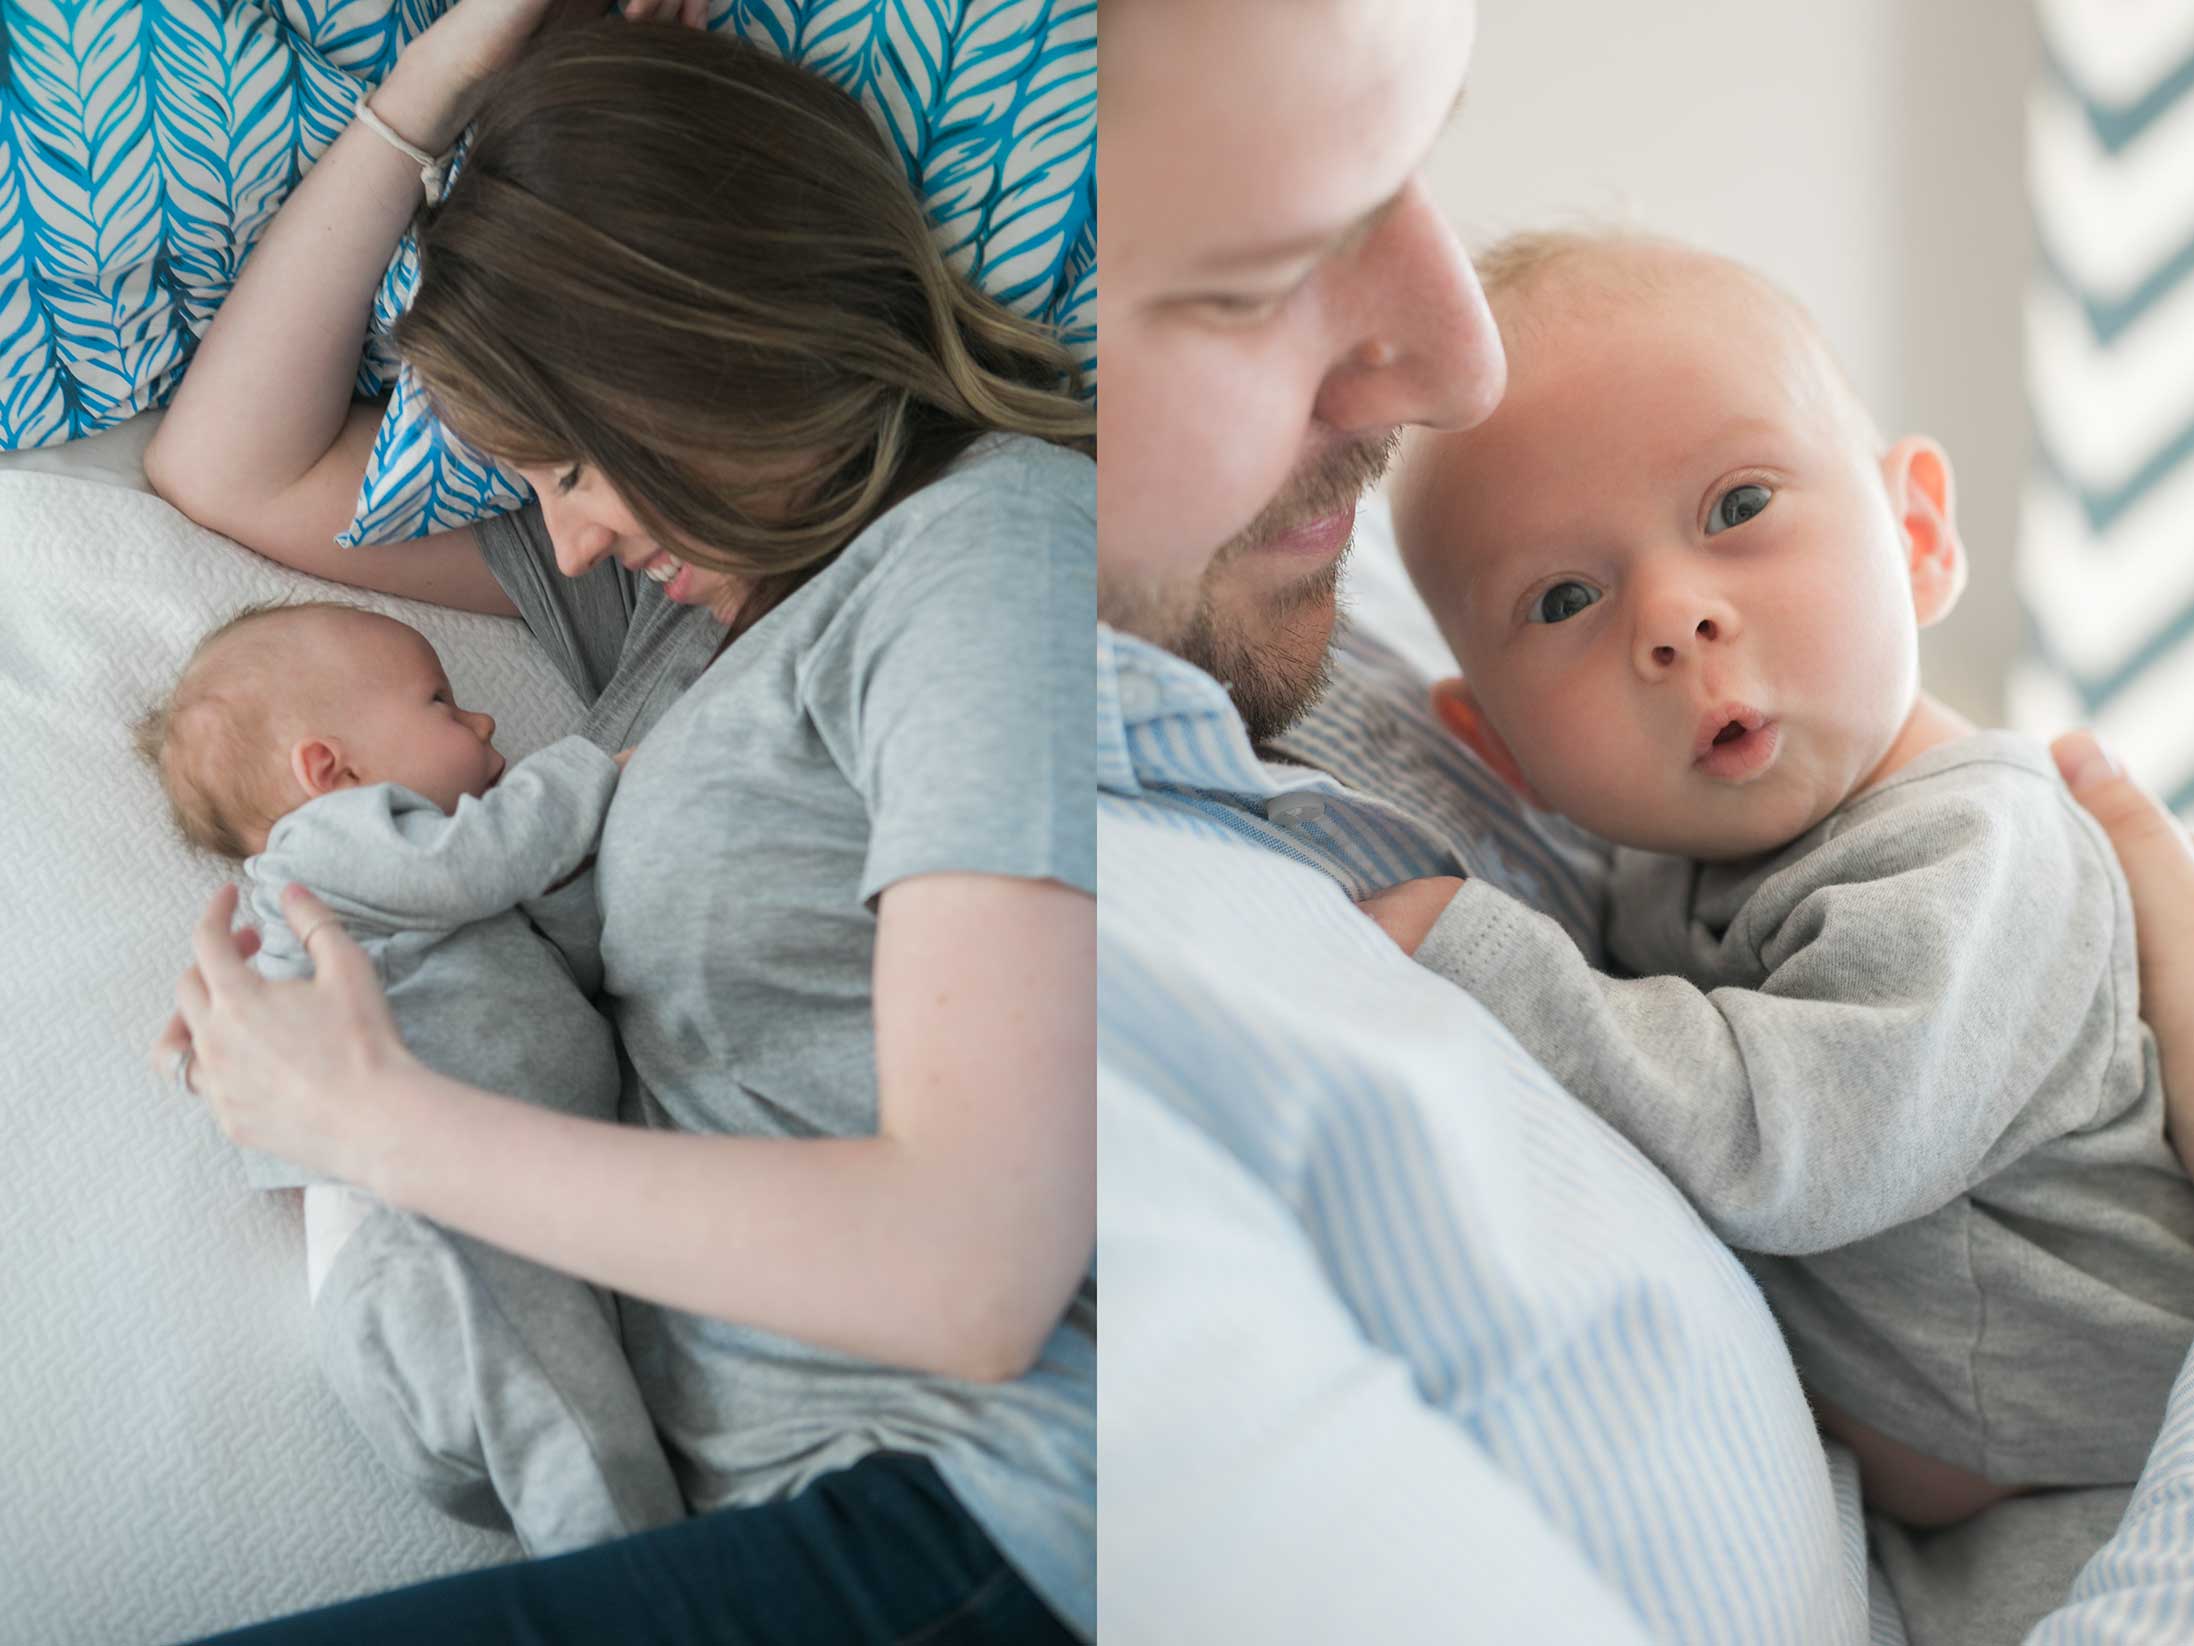 mom-and-baby-on-bed-newborn-photography-portland-oregon-photographer